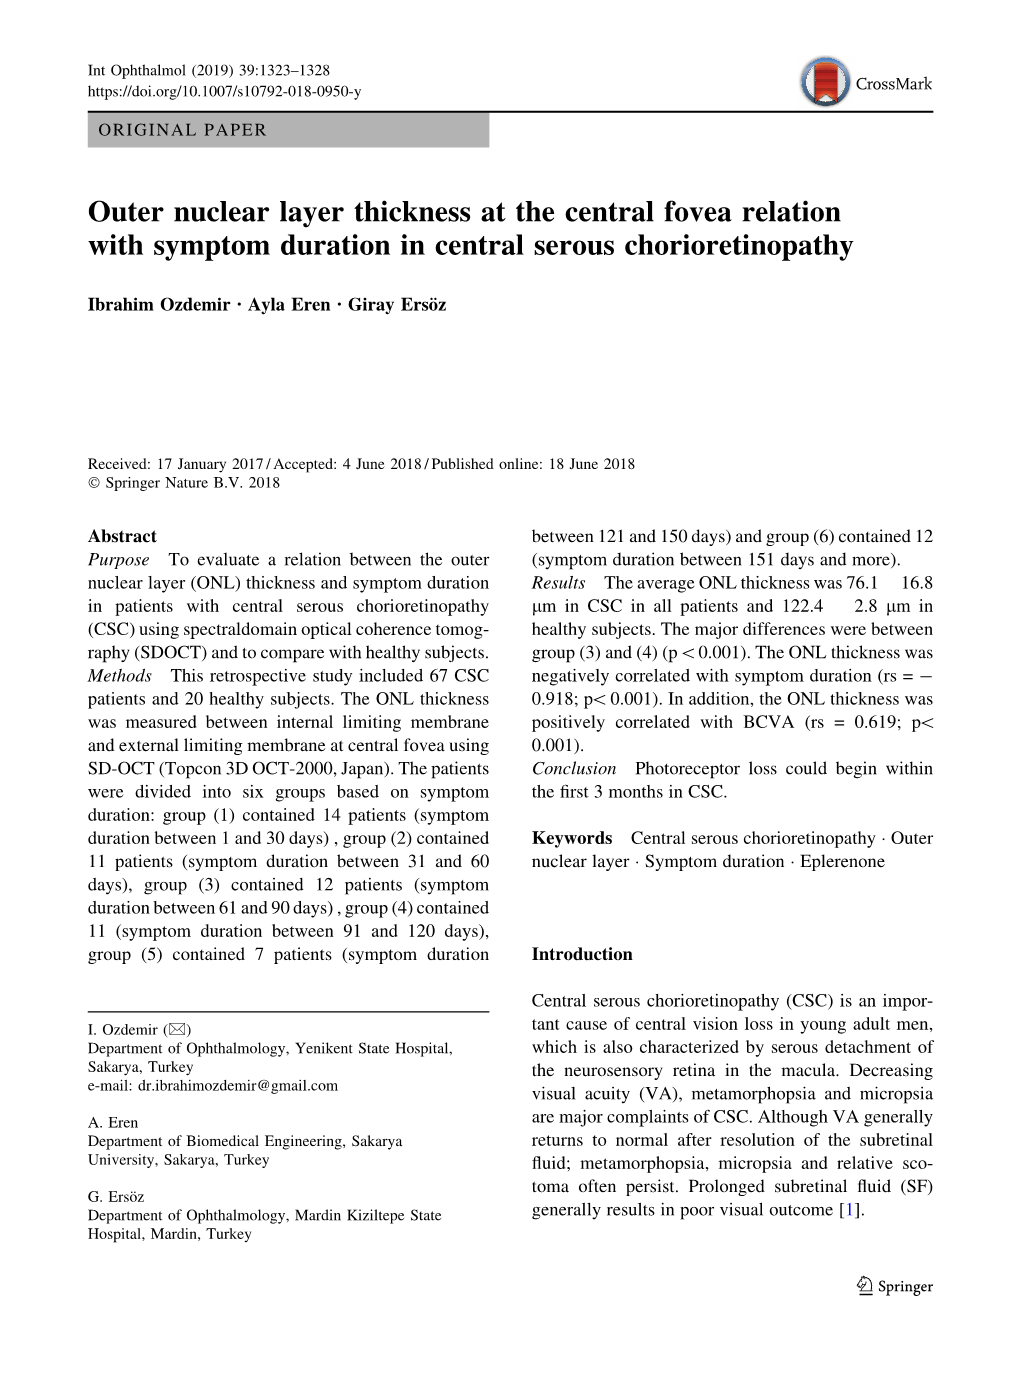 Outer Nuclear Layer Thickness at the Central Fovea Relation with Symptom Duration in Central Serous Chorioretinopathy